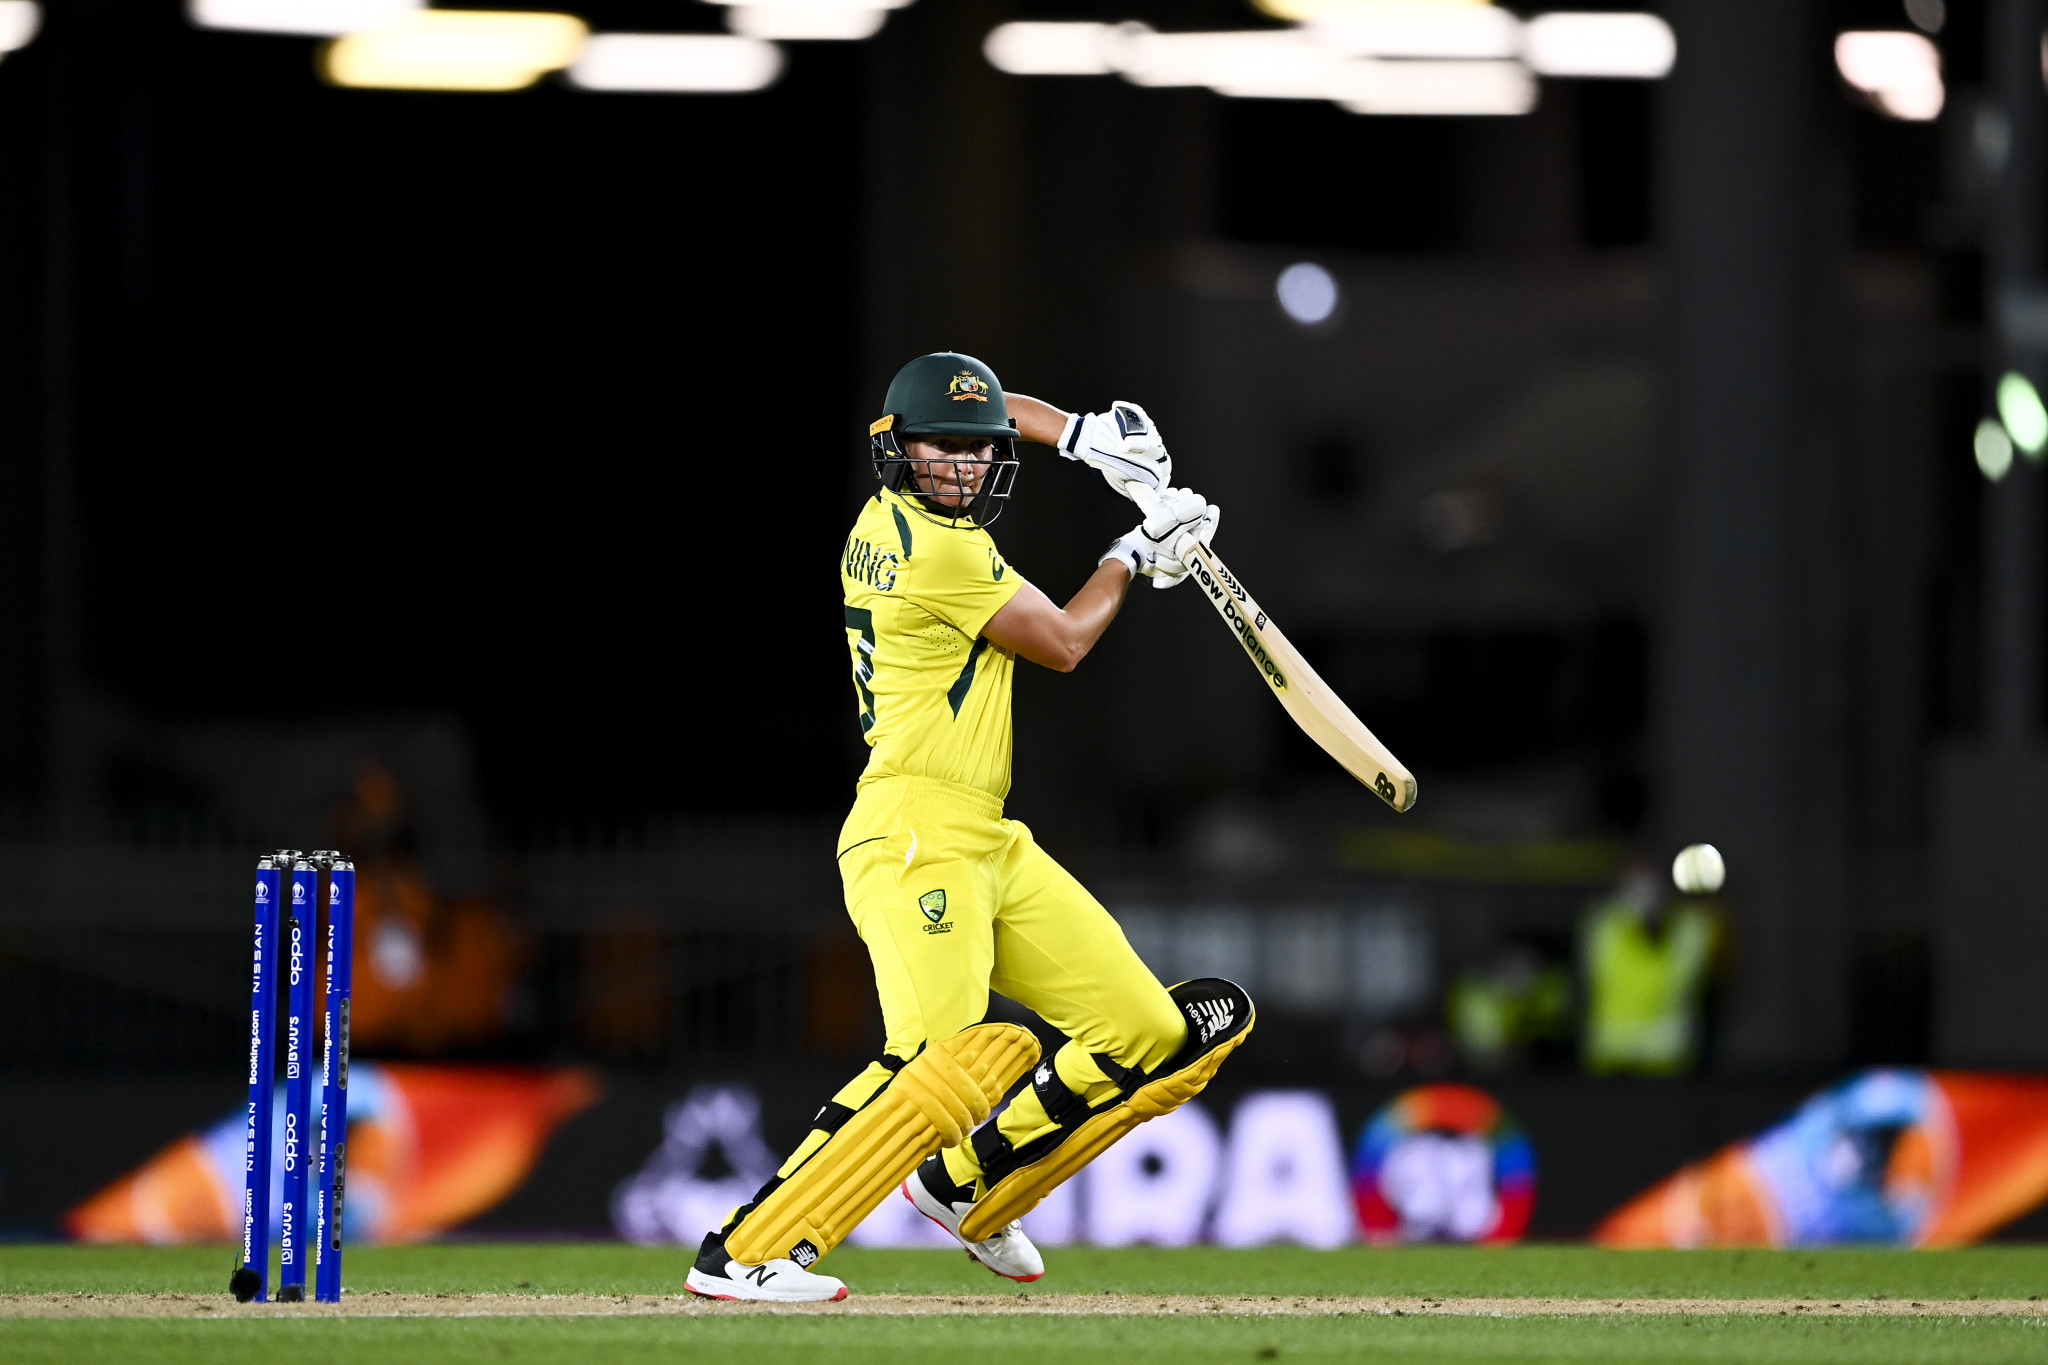 Australia beat India to stay perfect at Women's Cricket World Cup and reach semi-finals